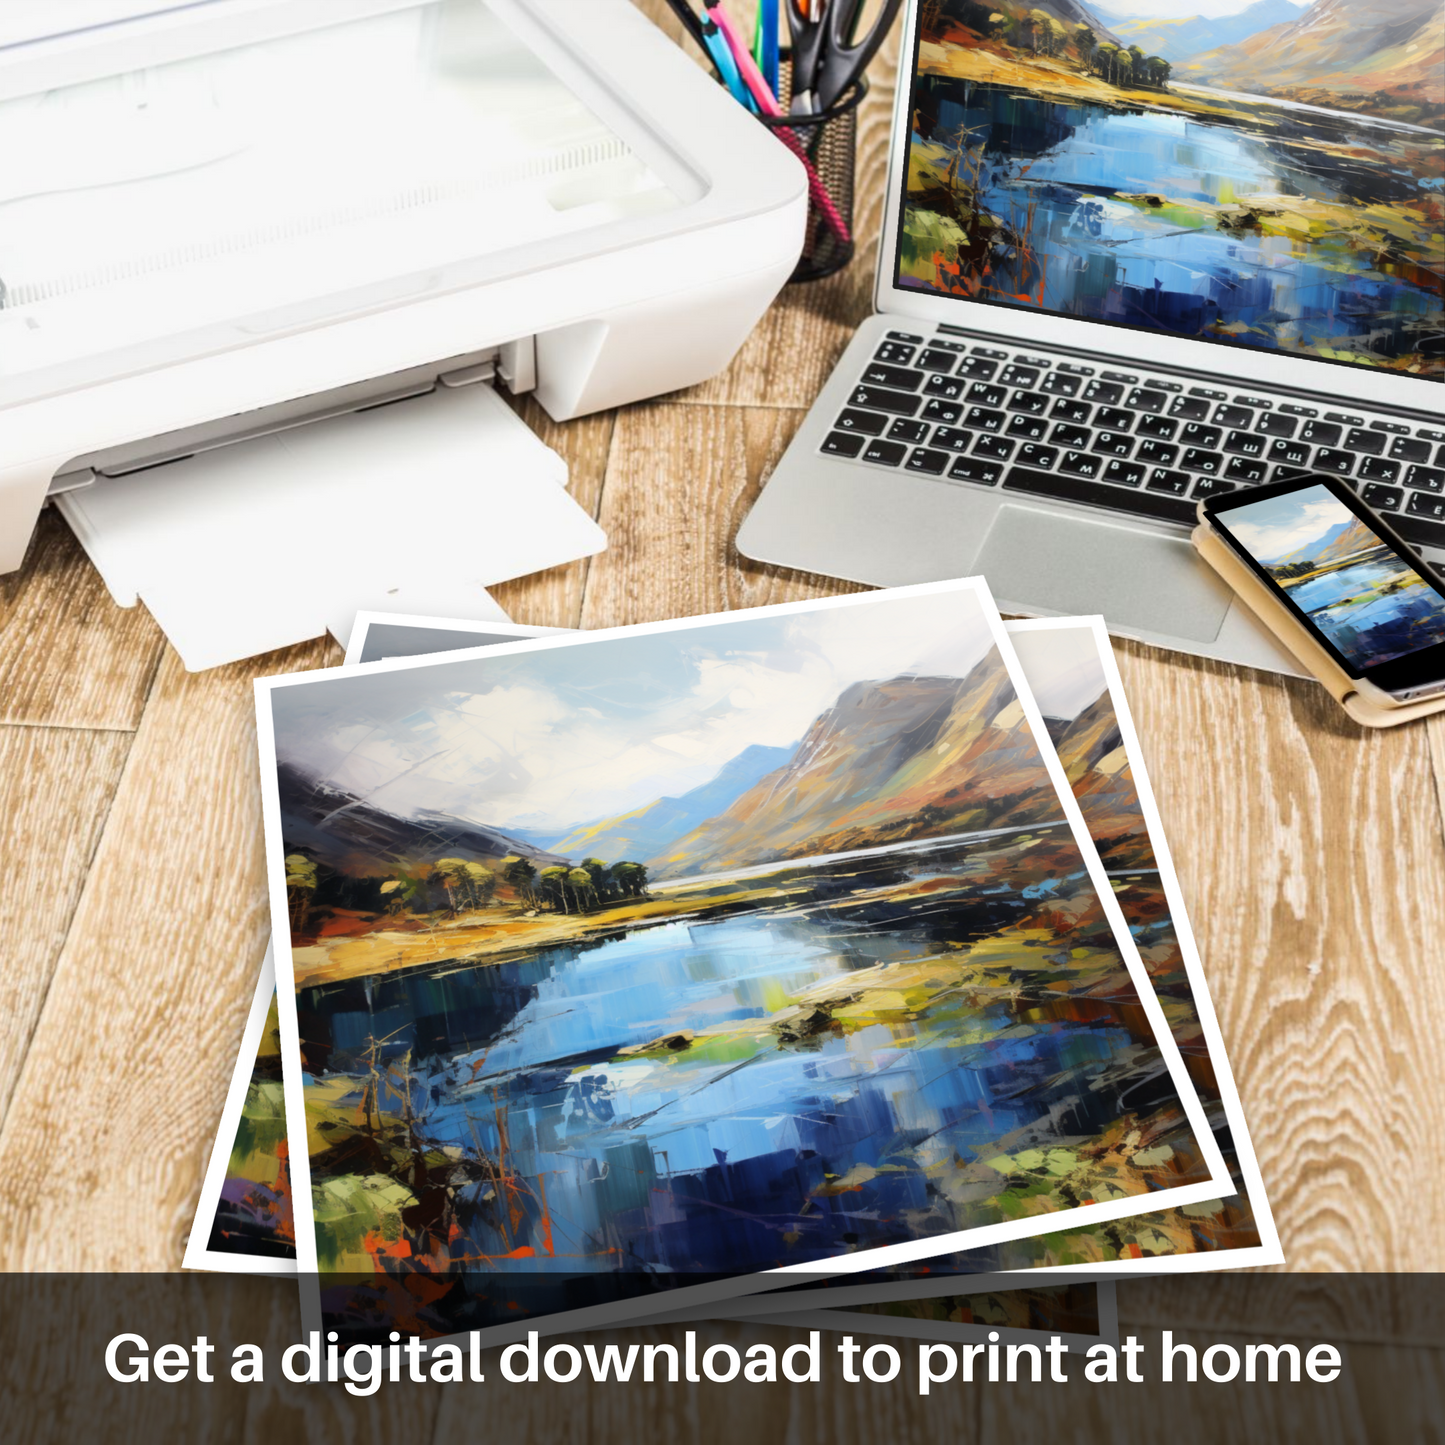 Downloadable and printable picture of Loch Shiel, Highlands